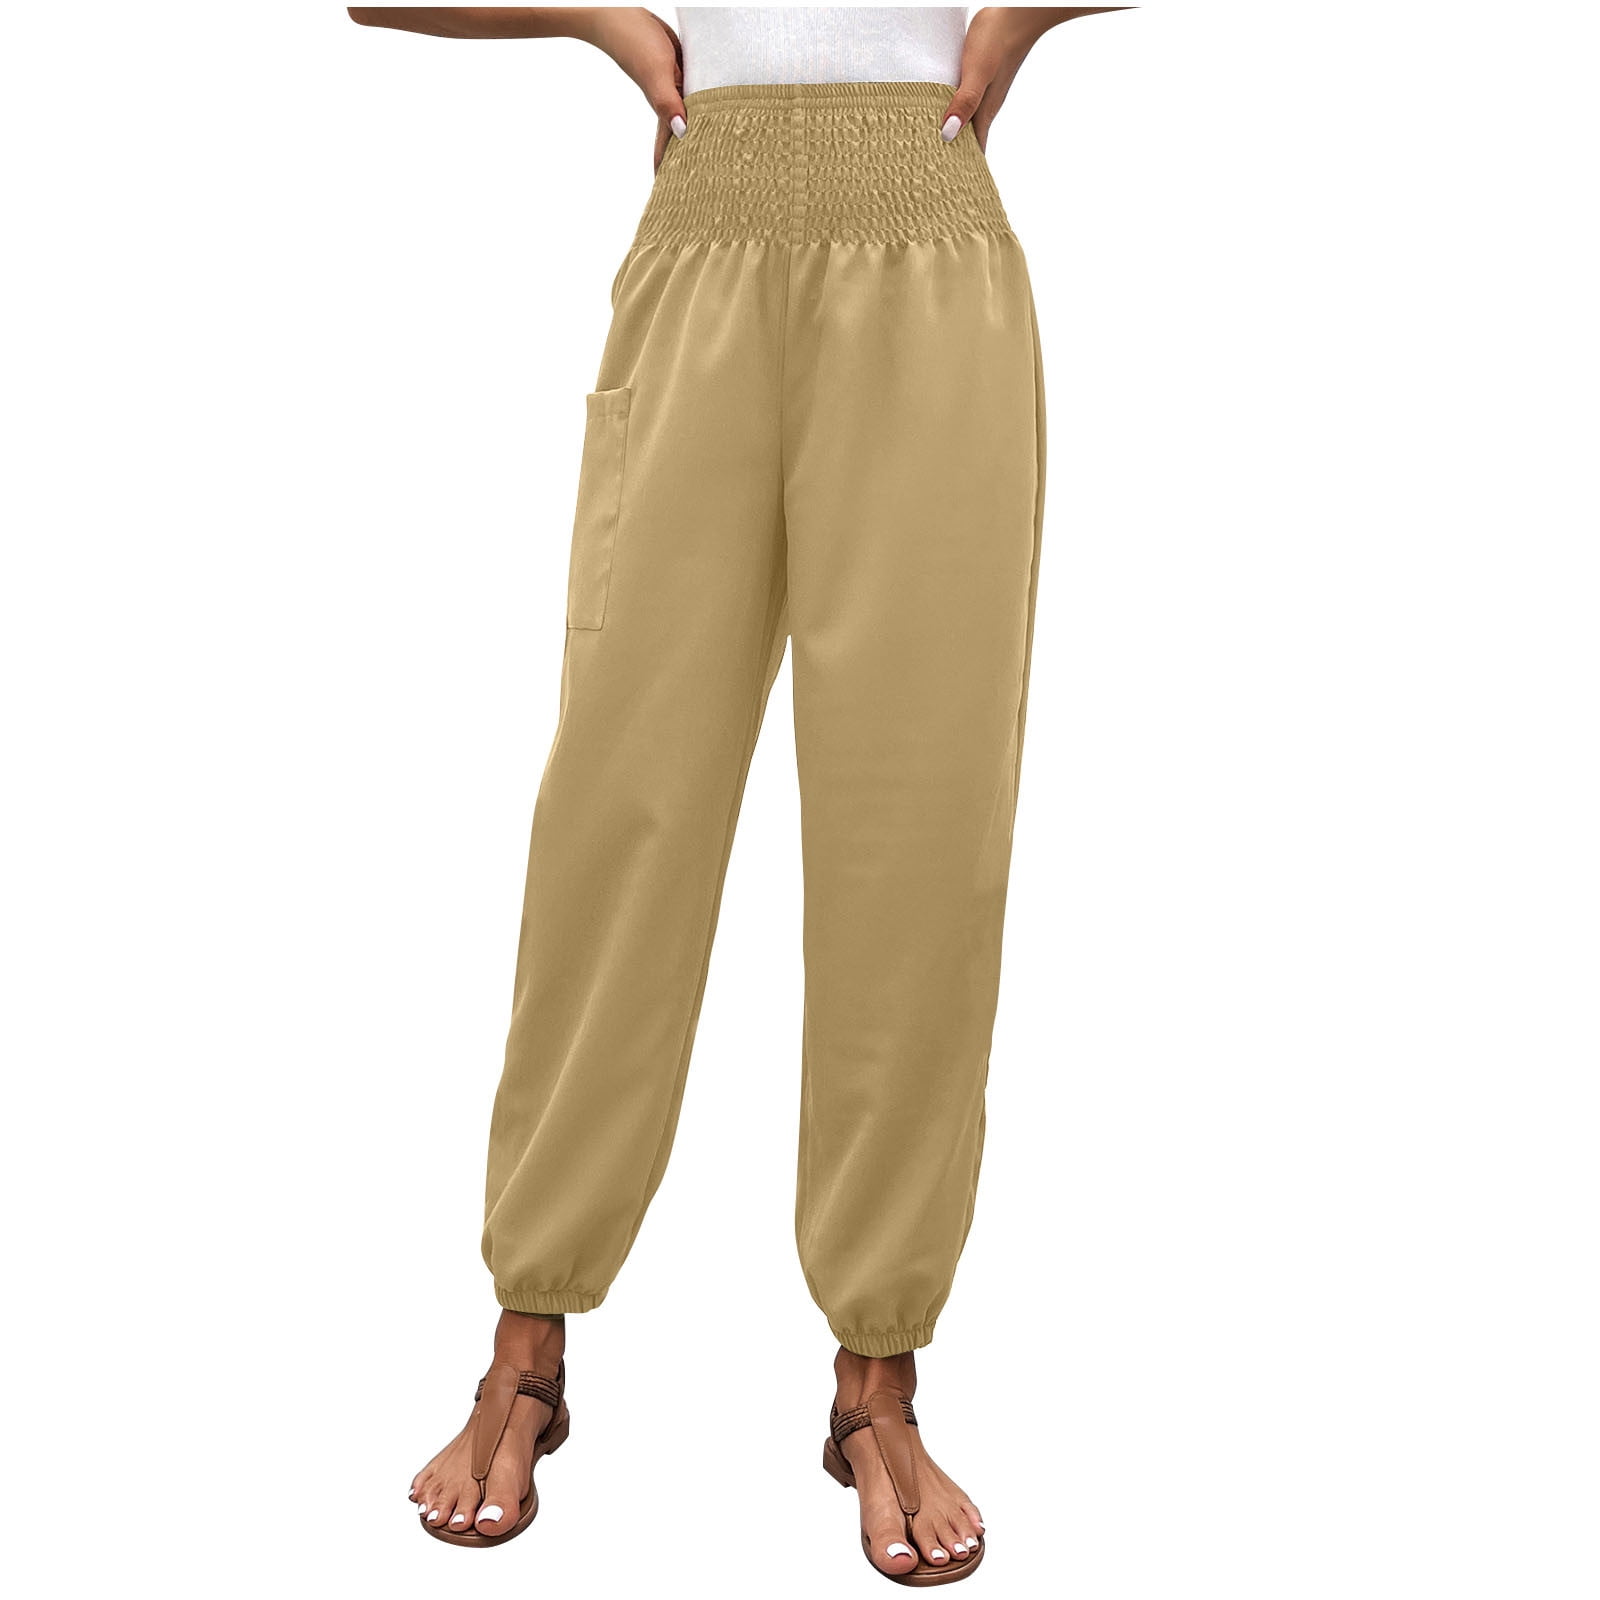 WHLBF Women's Plus Size Clearance Pants Solid Color Straight Wide Leg  Trousers with Pocket Khaki 6(M) 